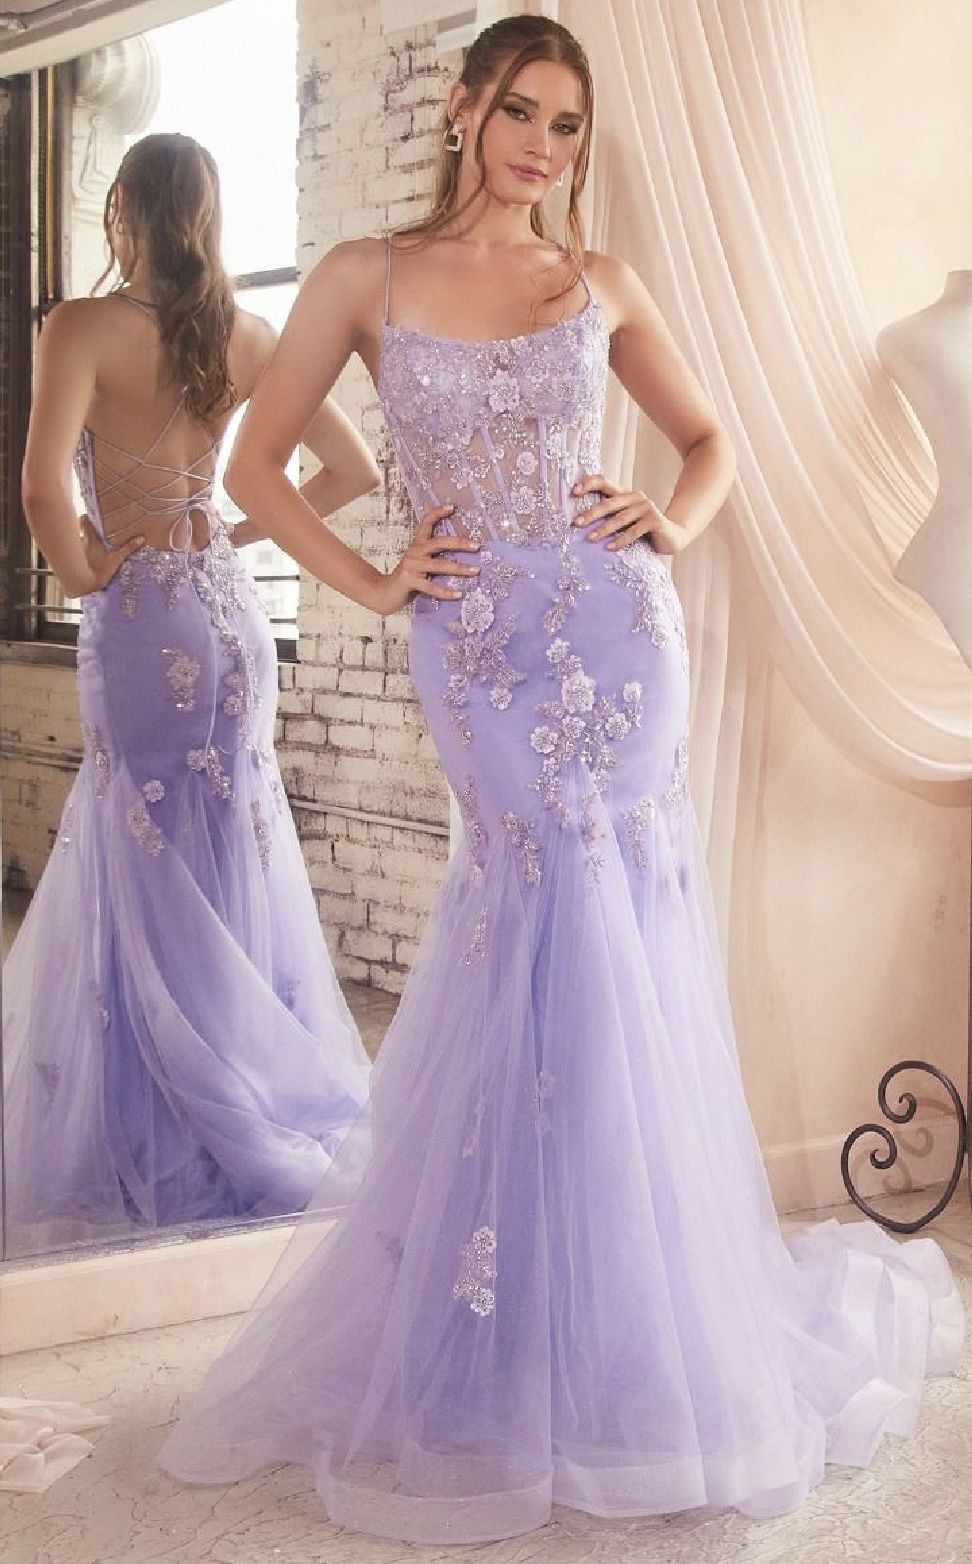 New With Tags Lilac Corset Bodice Long Formal Dress & Prom Dress $255